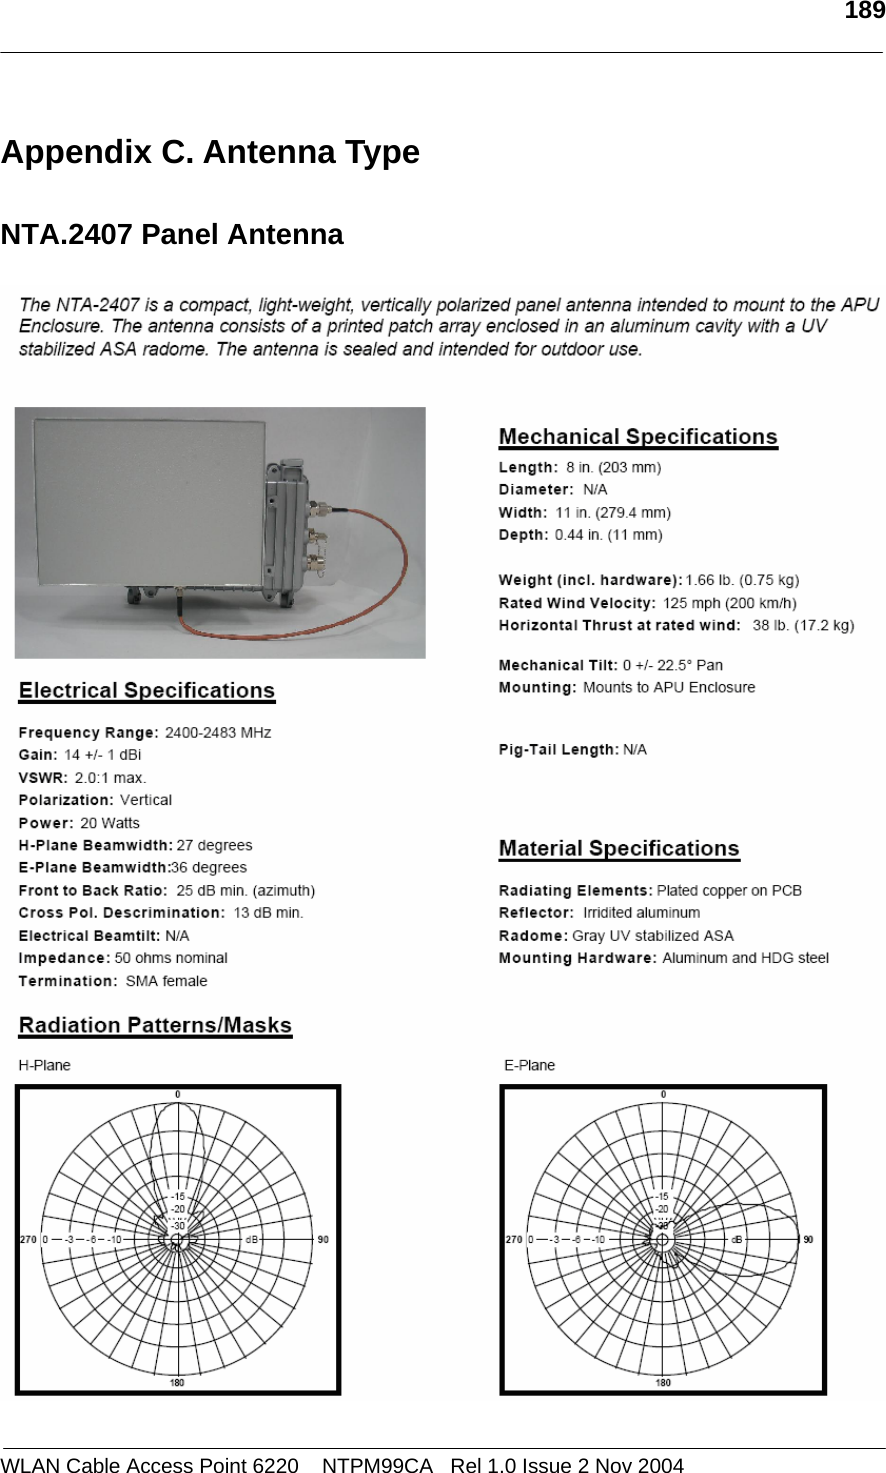   189  WLAN Cable Access Point 6220    NTPM99CA   Rel 1.0 Issue 2 Nov 2004 Appendix C. Antenna Type   NTA.2407 Panel Antenna      